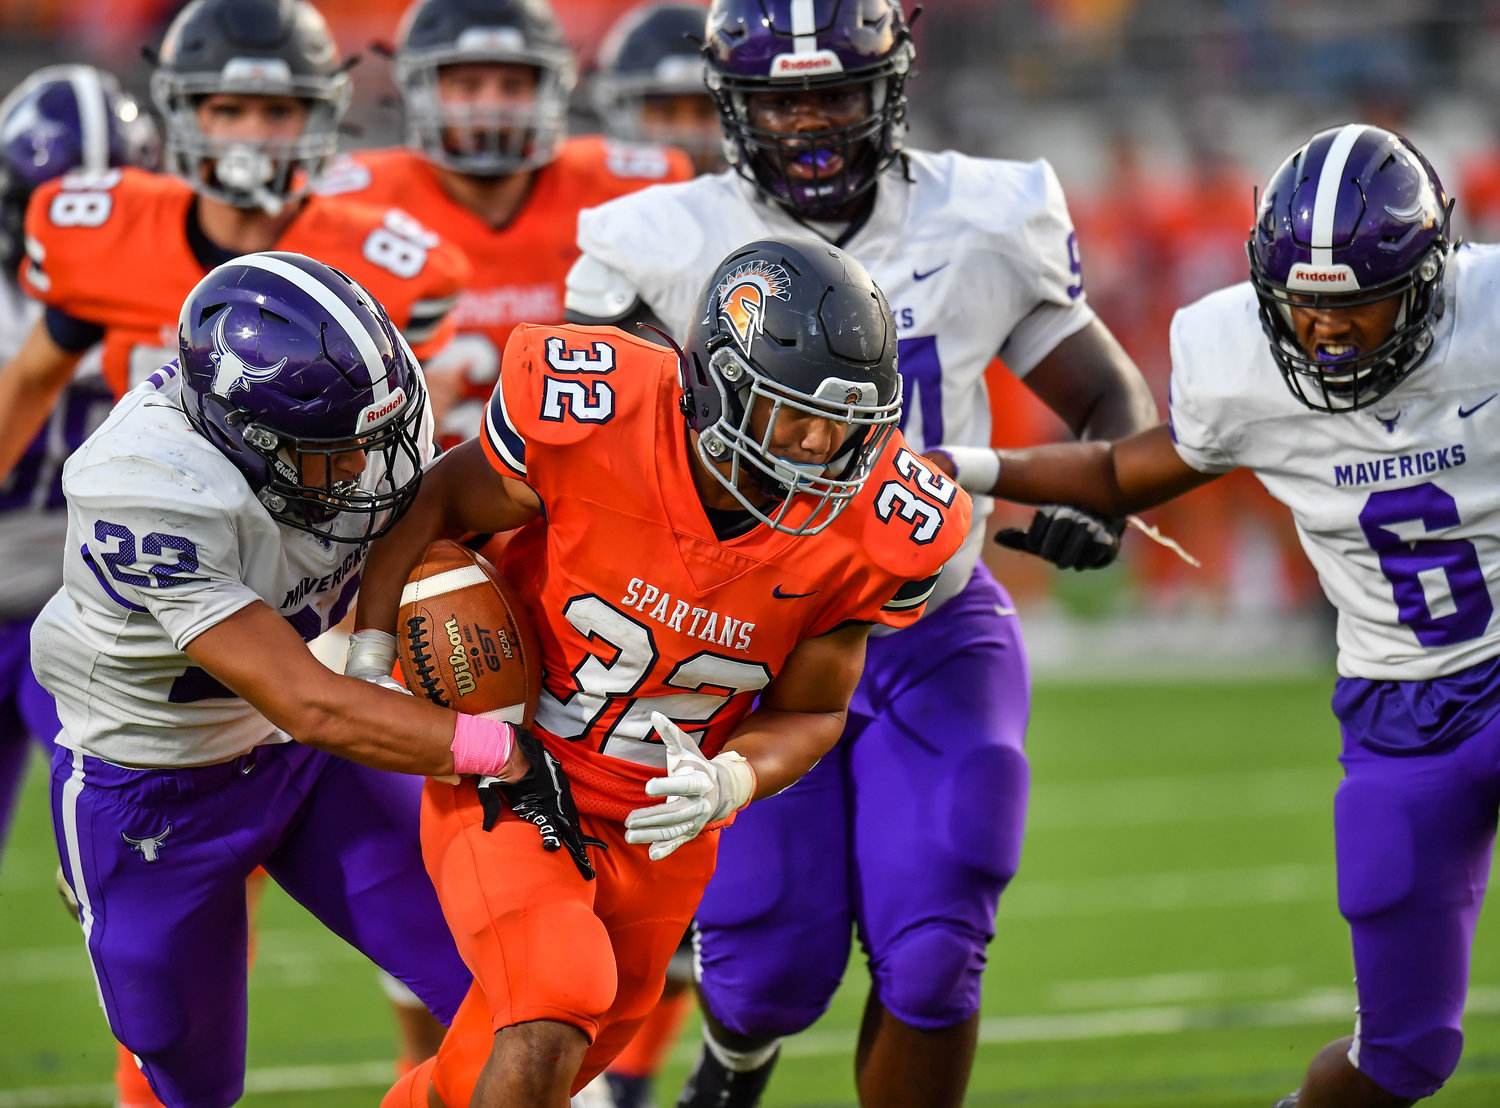 Katy, Tx. Oct. 8, 2021: Seven Lakes Michael Amico #32  avoids the stop by Morton Ranchs Carsen Luna #22 during the second half scoring a TD during a District 19-6A game between Seven Lakes and Morton Ranch at Legacy Stadium in Katy. (Photo by Mark Goodman / Katy Times)